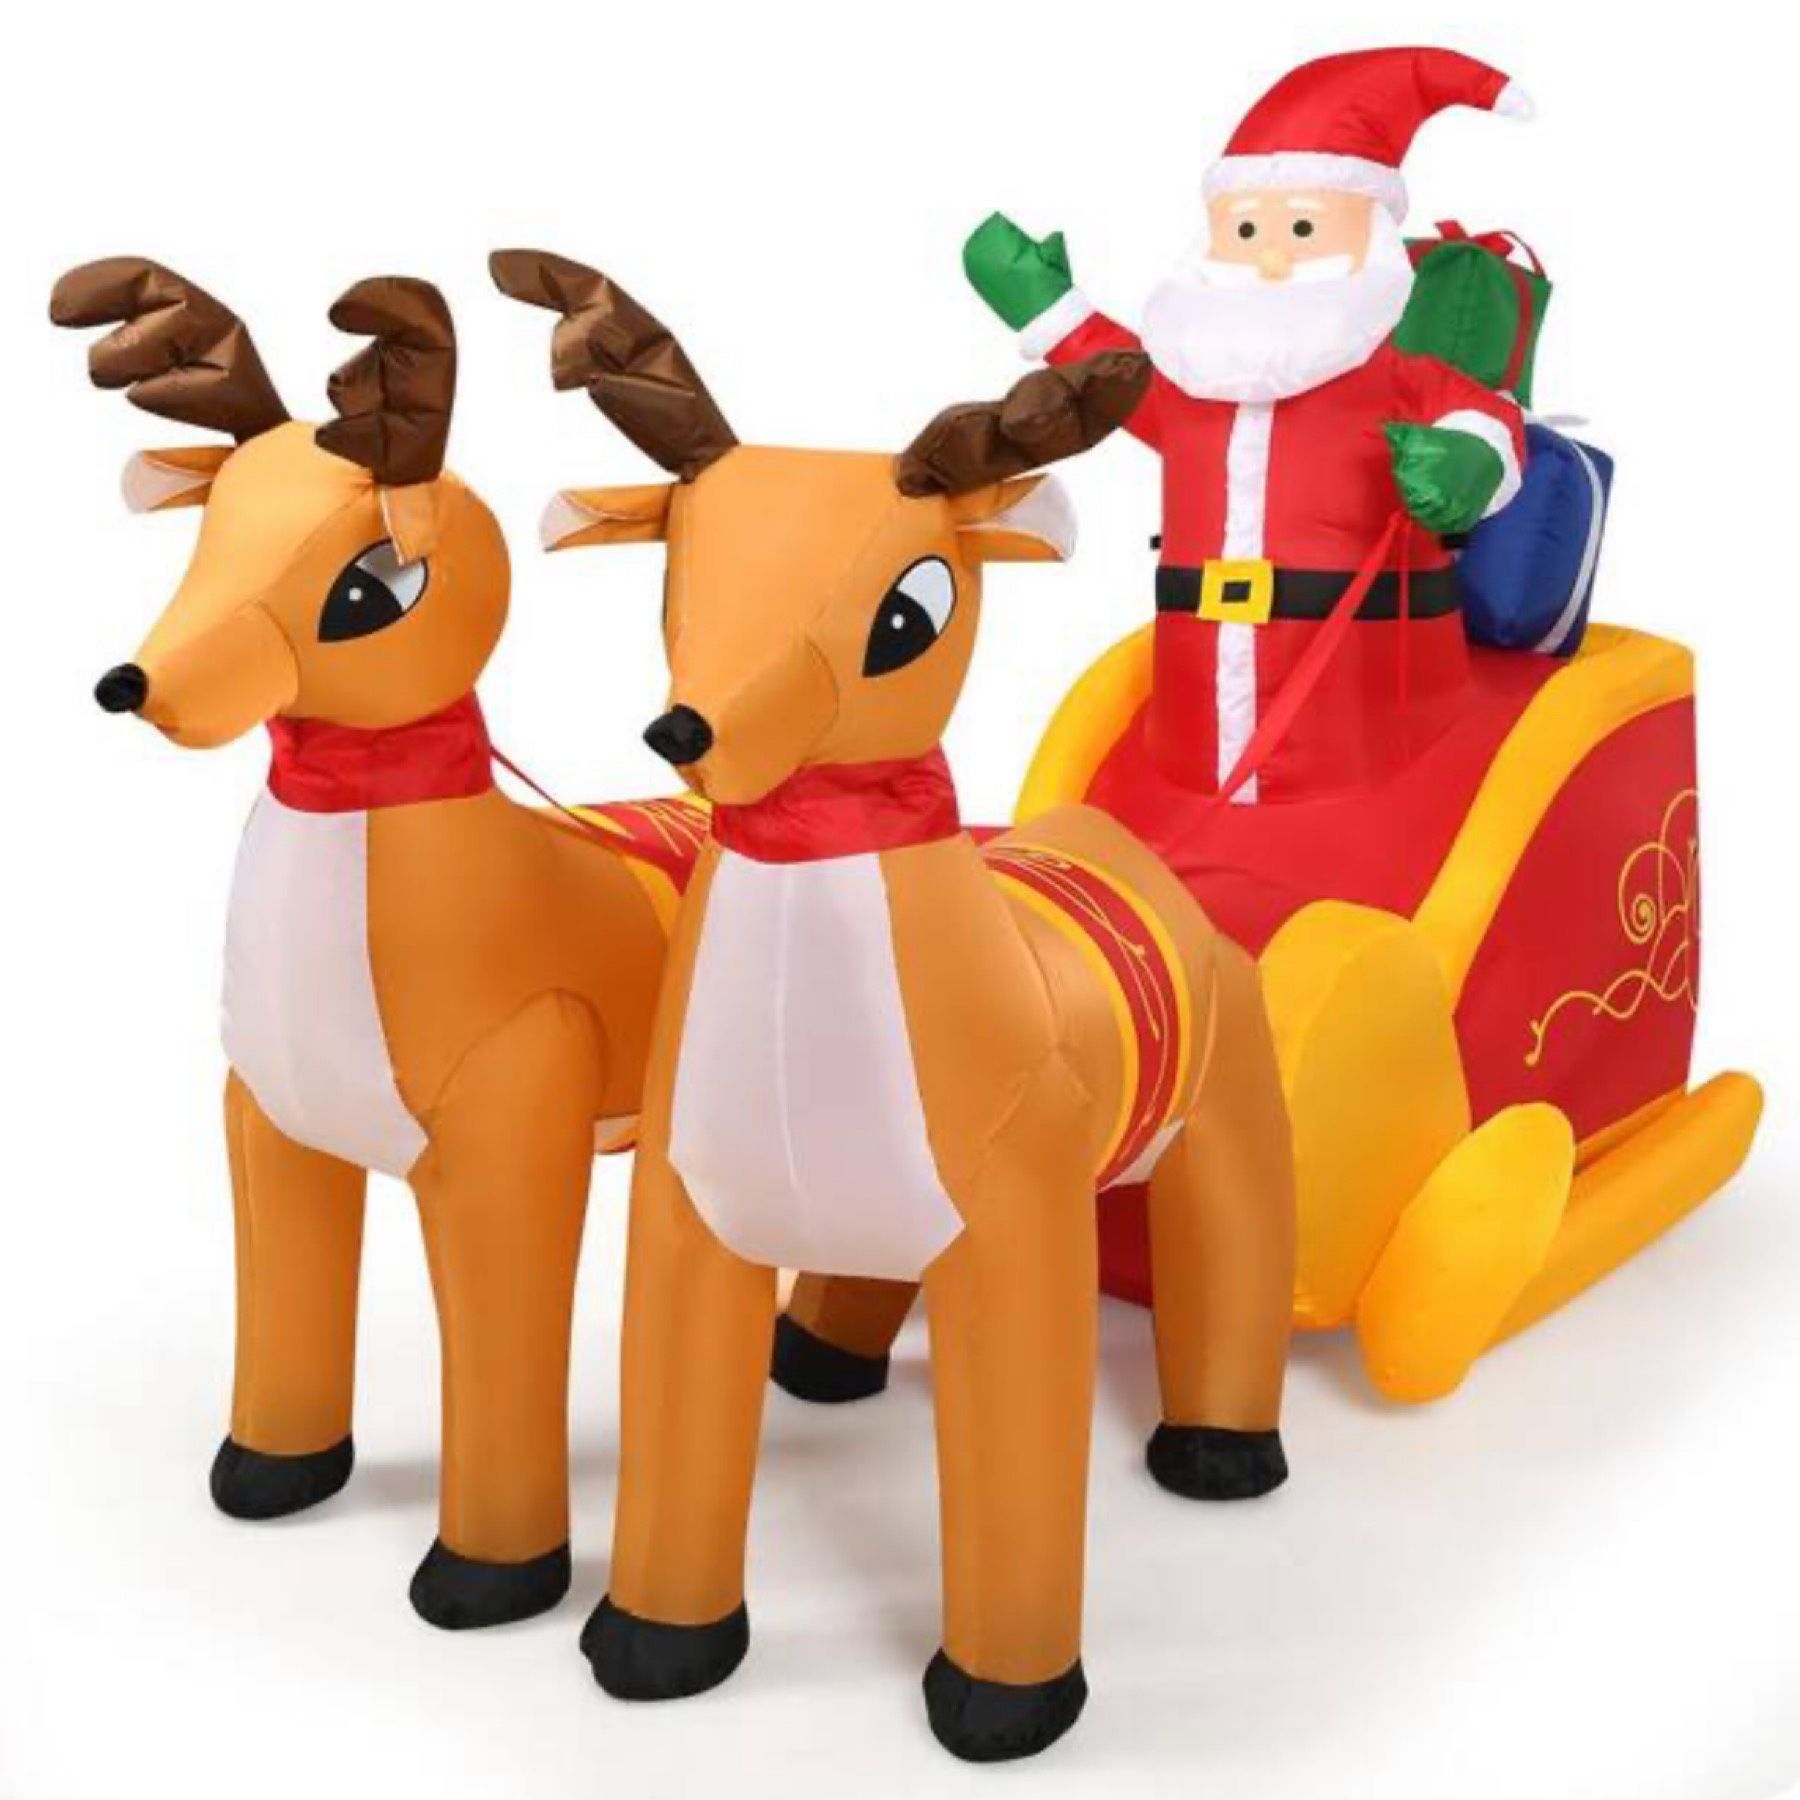 6ft Santa Claus with Deers Christmas Inflatable, Pre-lit LED Lights Xmas Decor